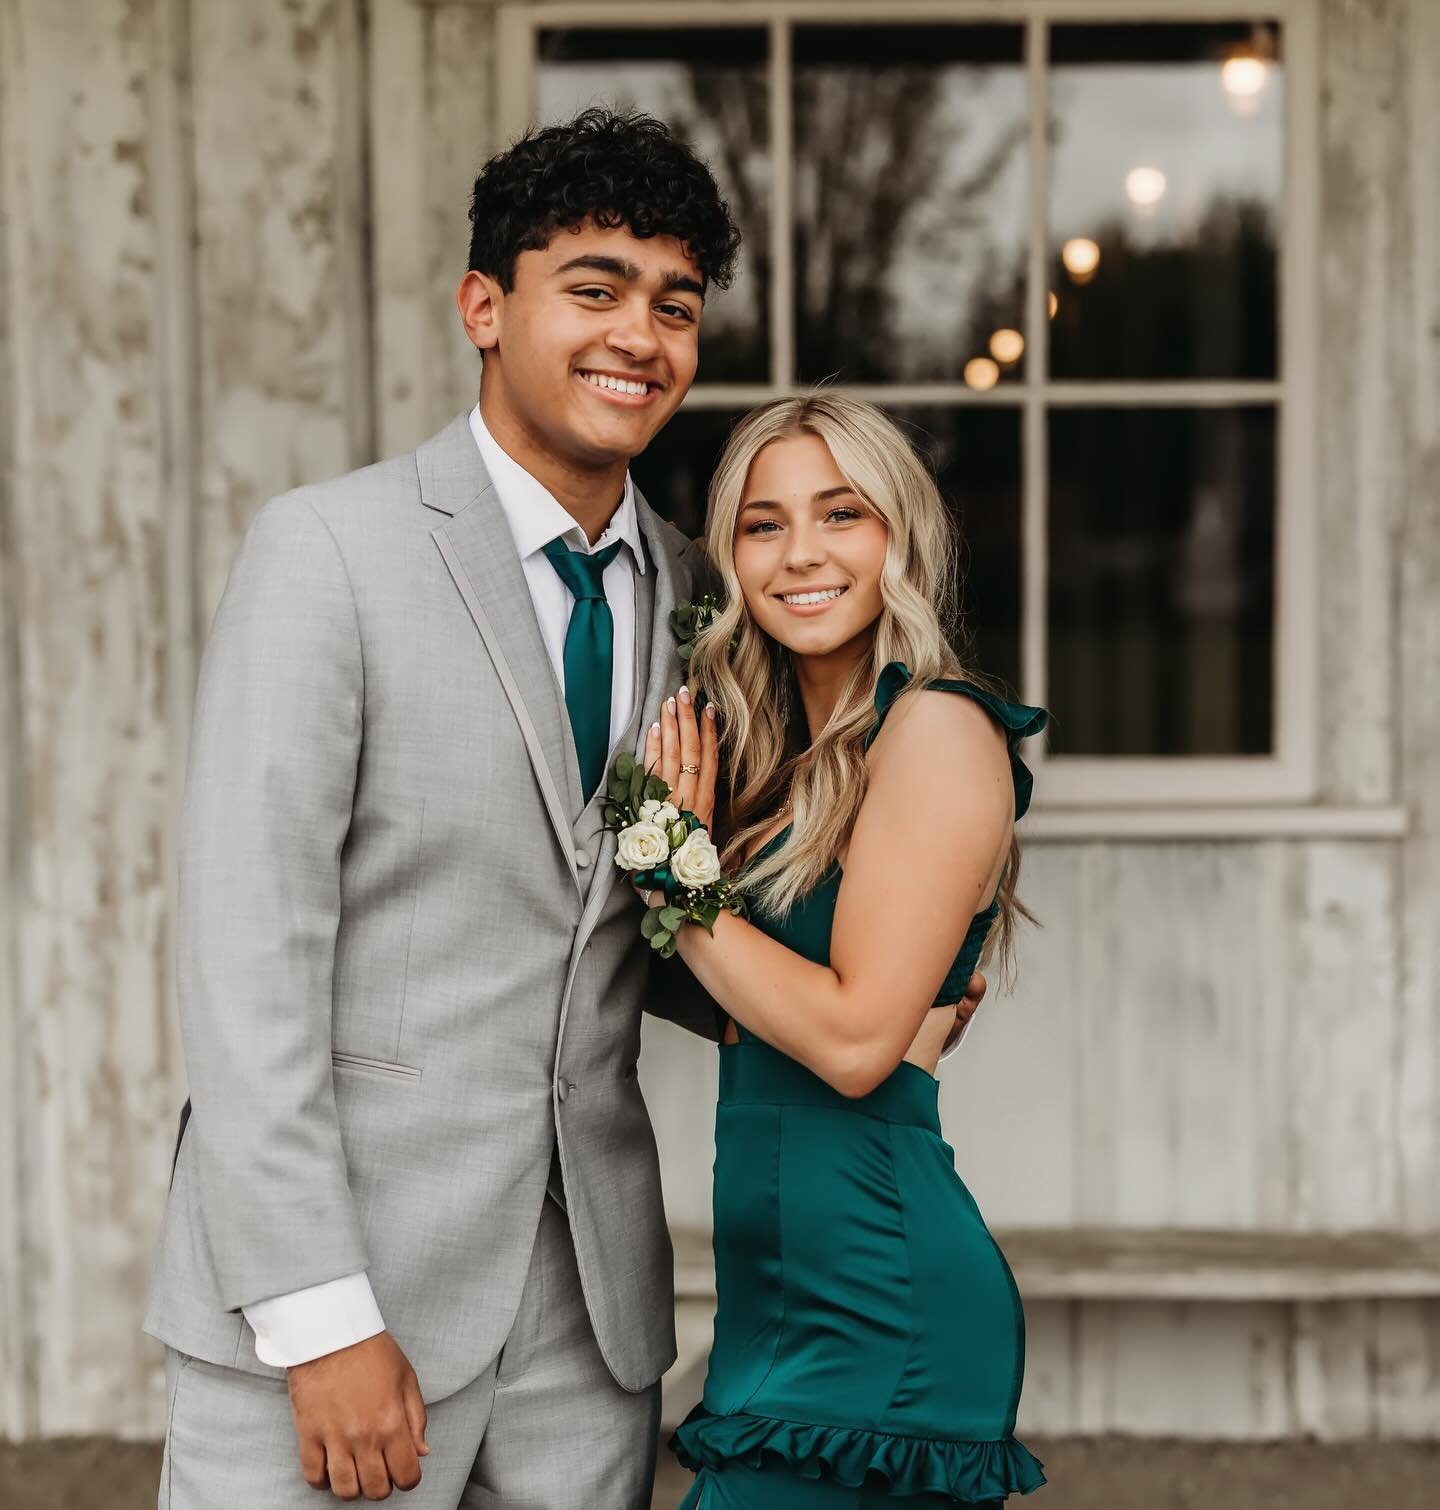 My daughter&rsquo;s senior year has gone by so fast! She went to prom last night with her best friend since birth. Their final dance&hellip;they looked so handsome/beautiful! ❤️The countdown is on now! They&rsquo;ll be graduating in no time. 
.
.
.
.